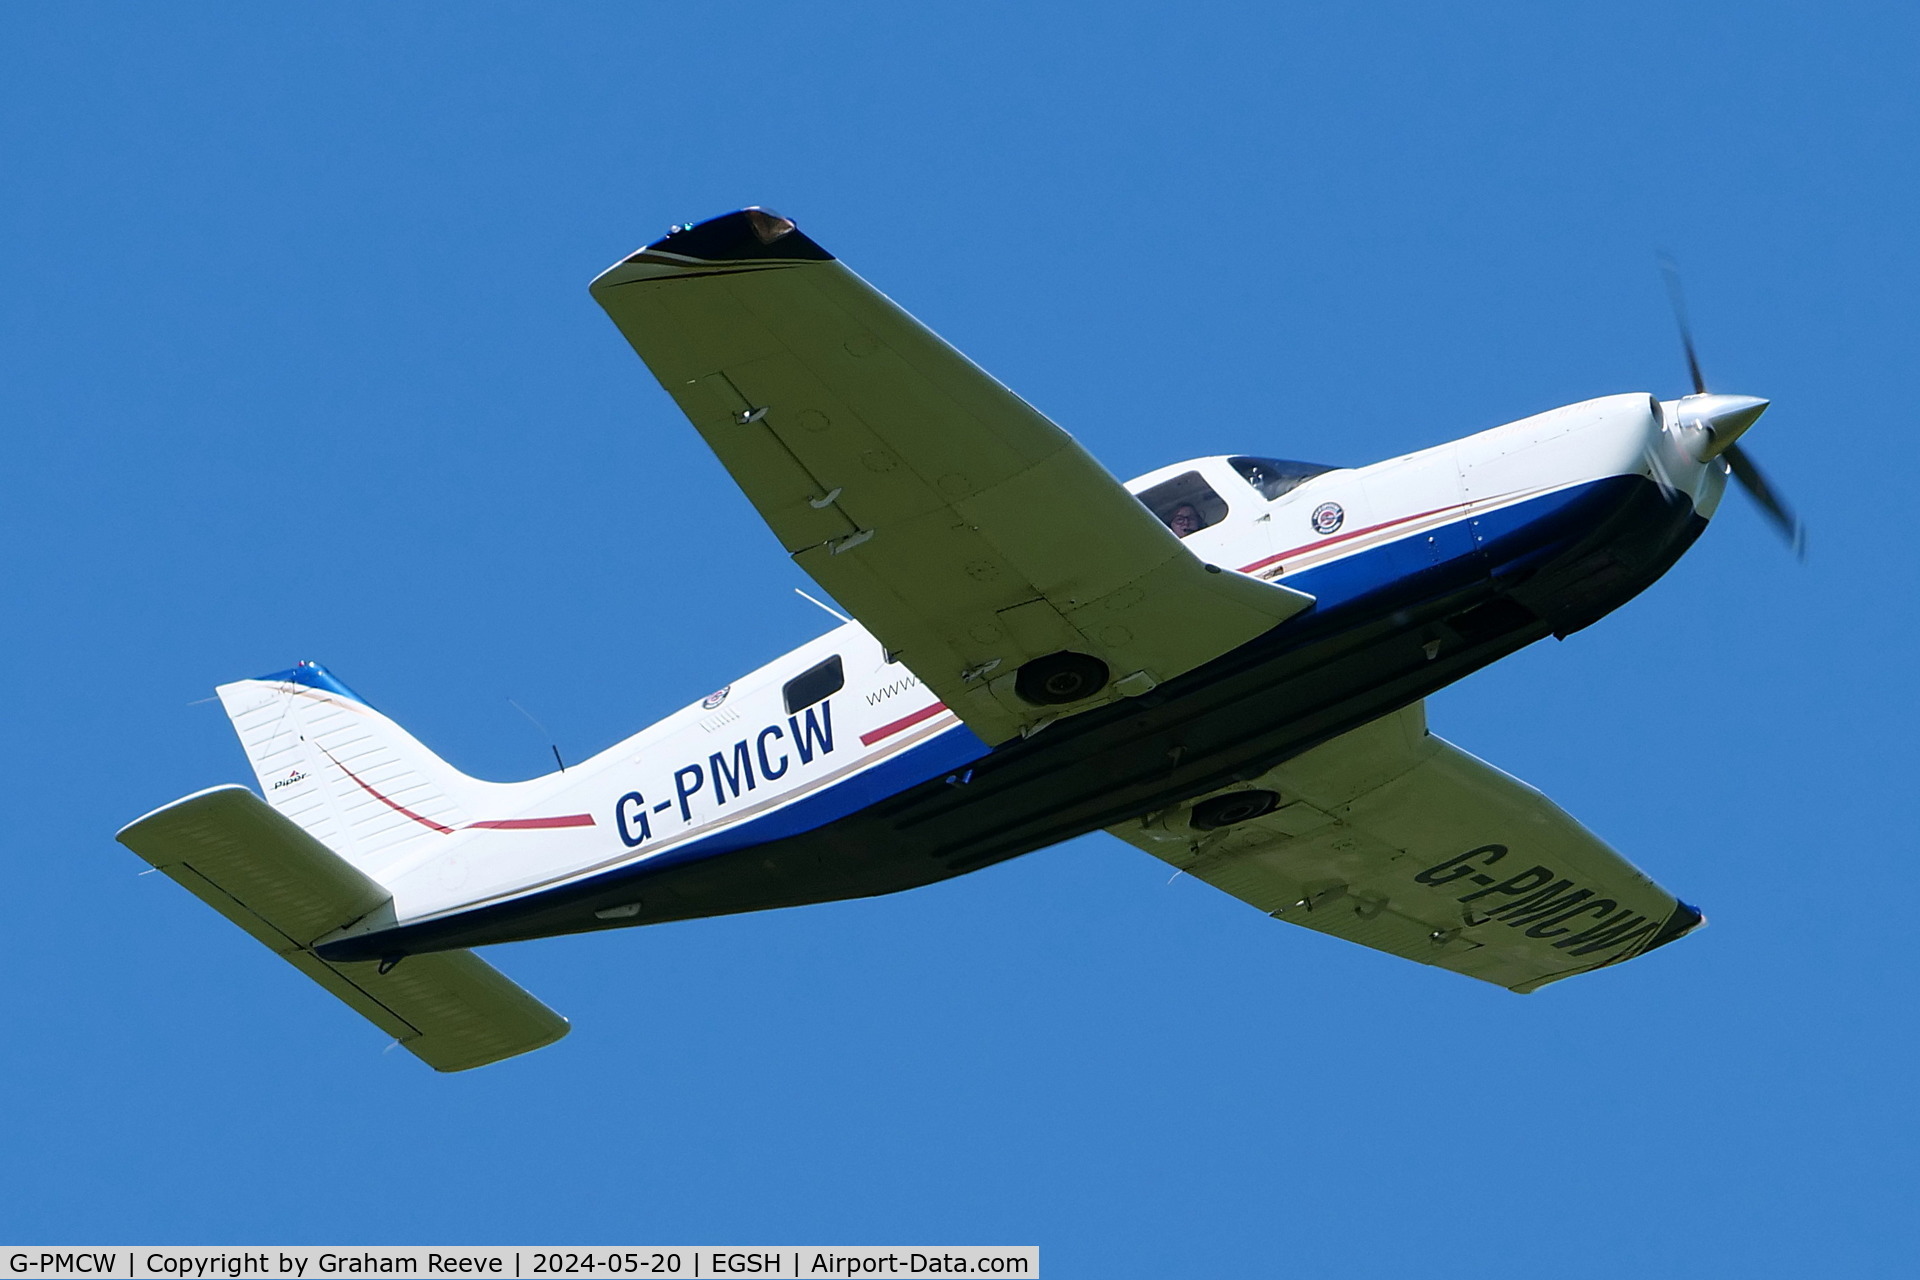 G-PMCW, 2006 Piper PA-32R-301 Saratoga C/N 3246240, Departing from Norwich.